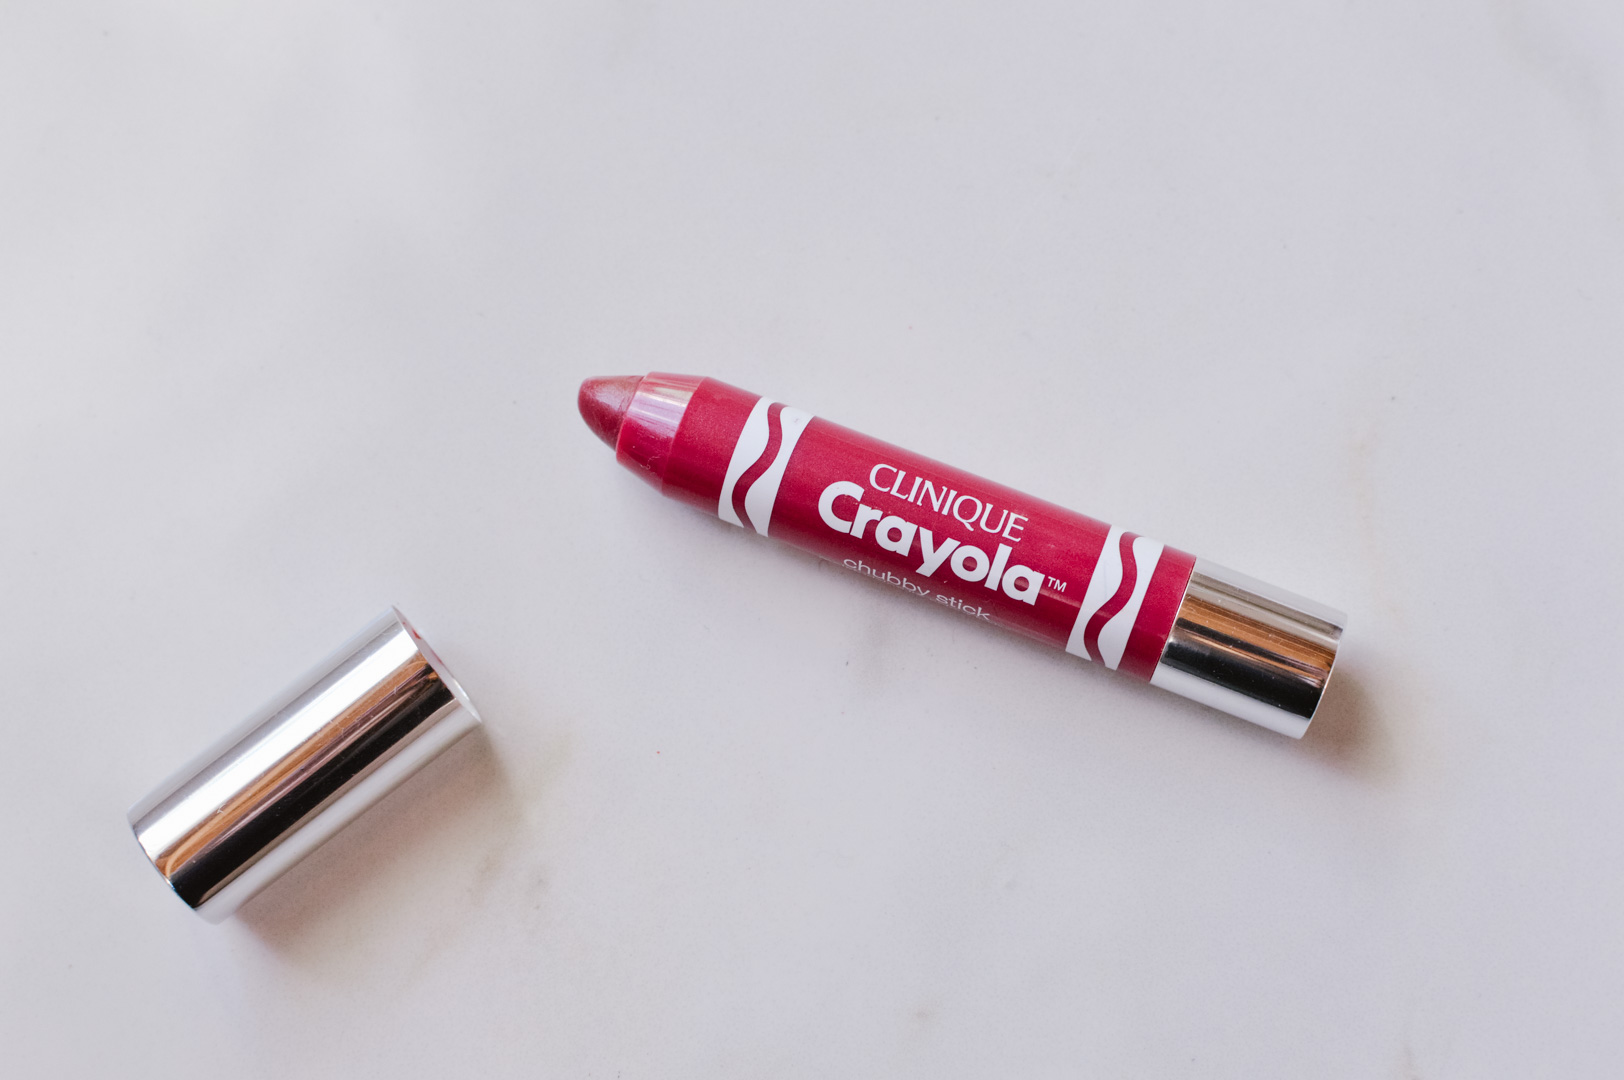 Clinique crayola chubby stick in color mauvalous